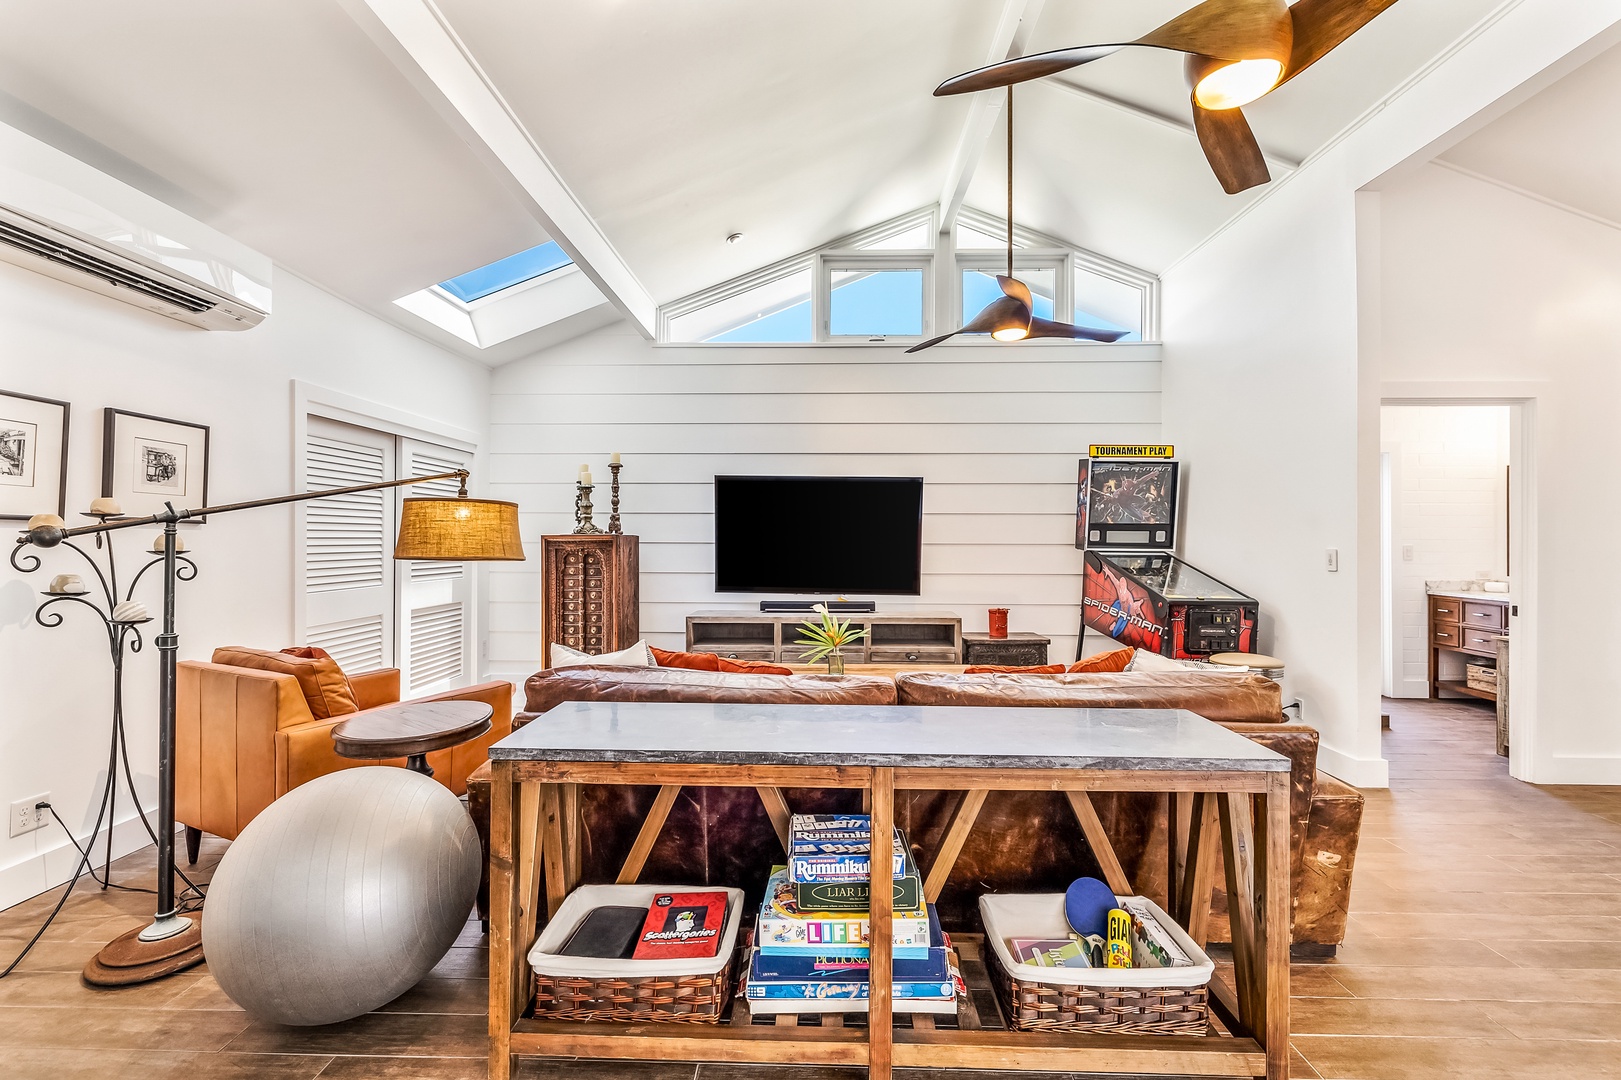 Kailua Vacation Rentals, Hale Ohana - You can even play a game of pinball here